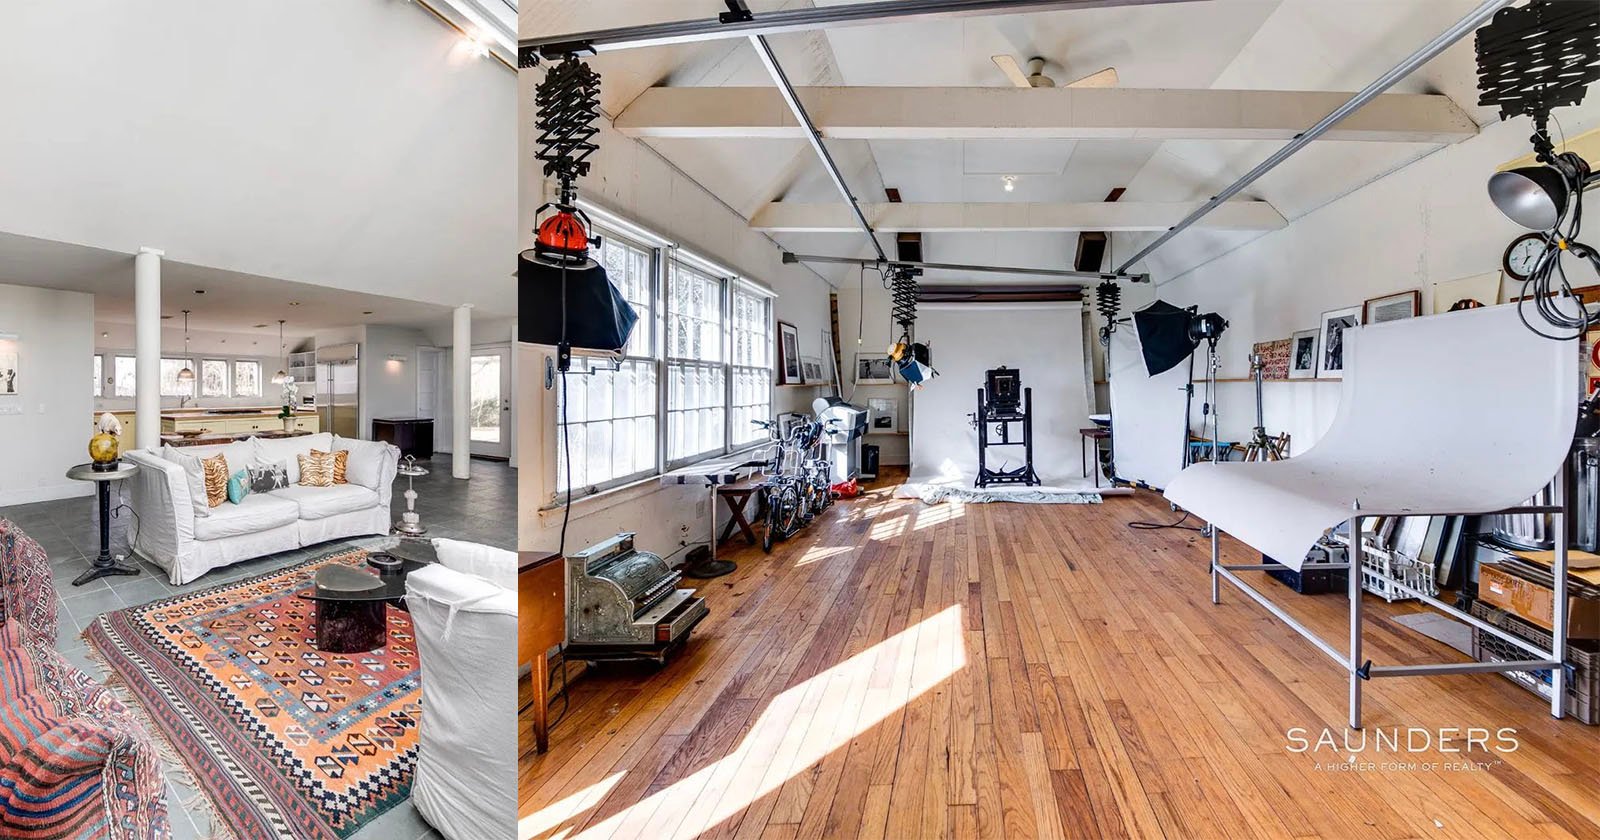 Late Photographer Elliott Erwitts Home For Sale Complete With Photo Studio